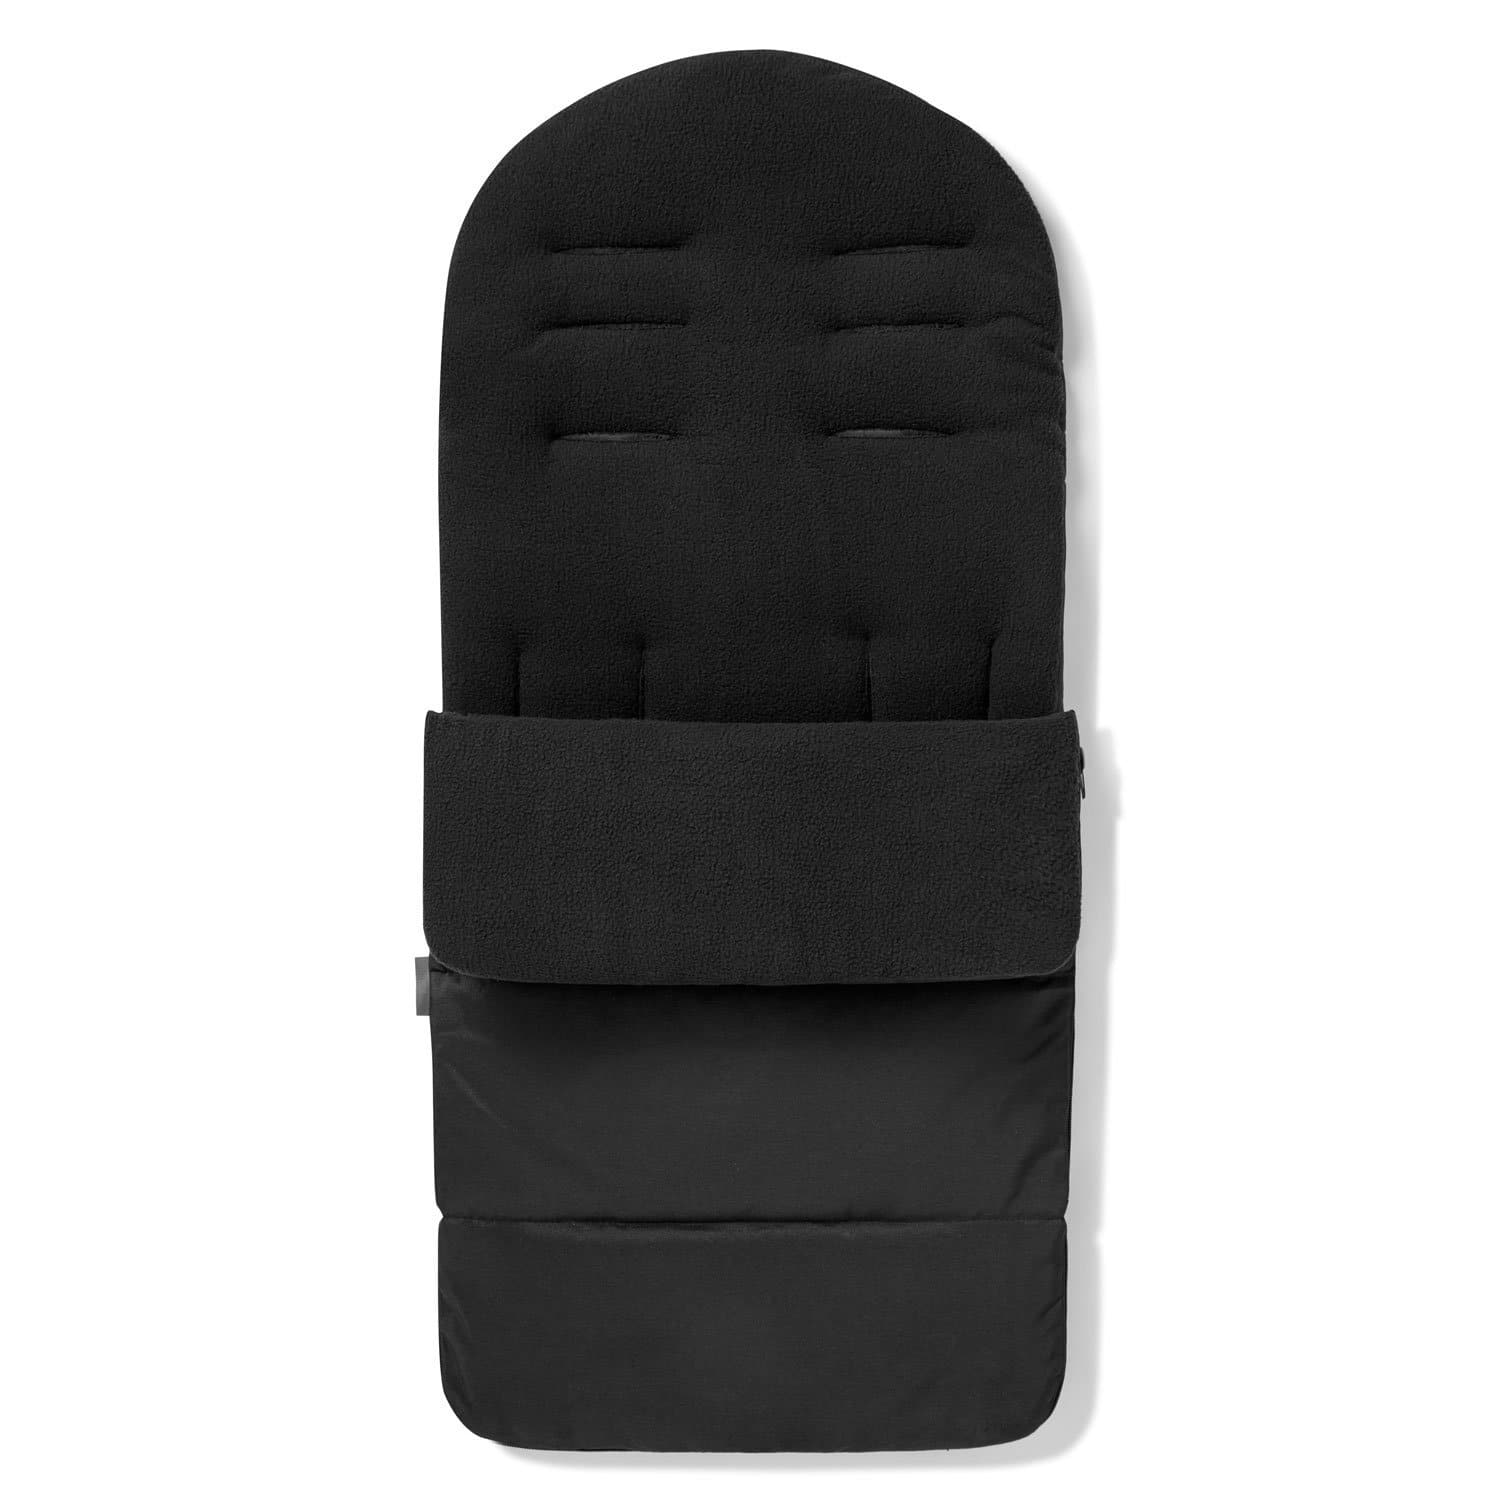 Premium Footmuff / Cosy Toes Compatible with Uppababy - Black Jack / Fits All Models | For Your Little One